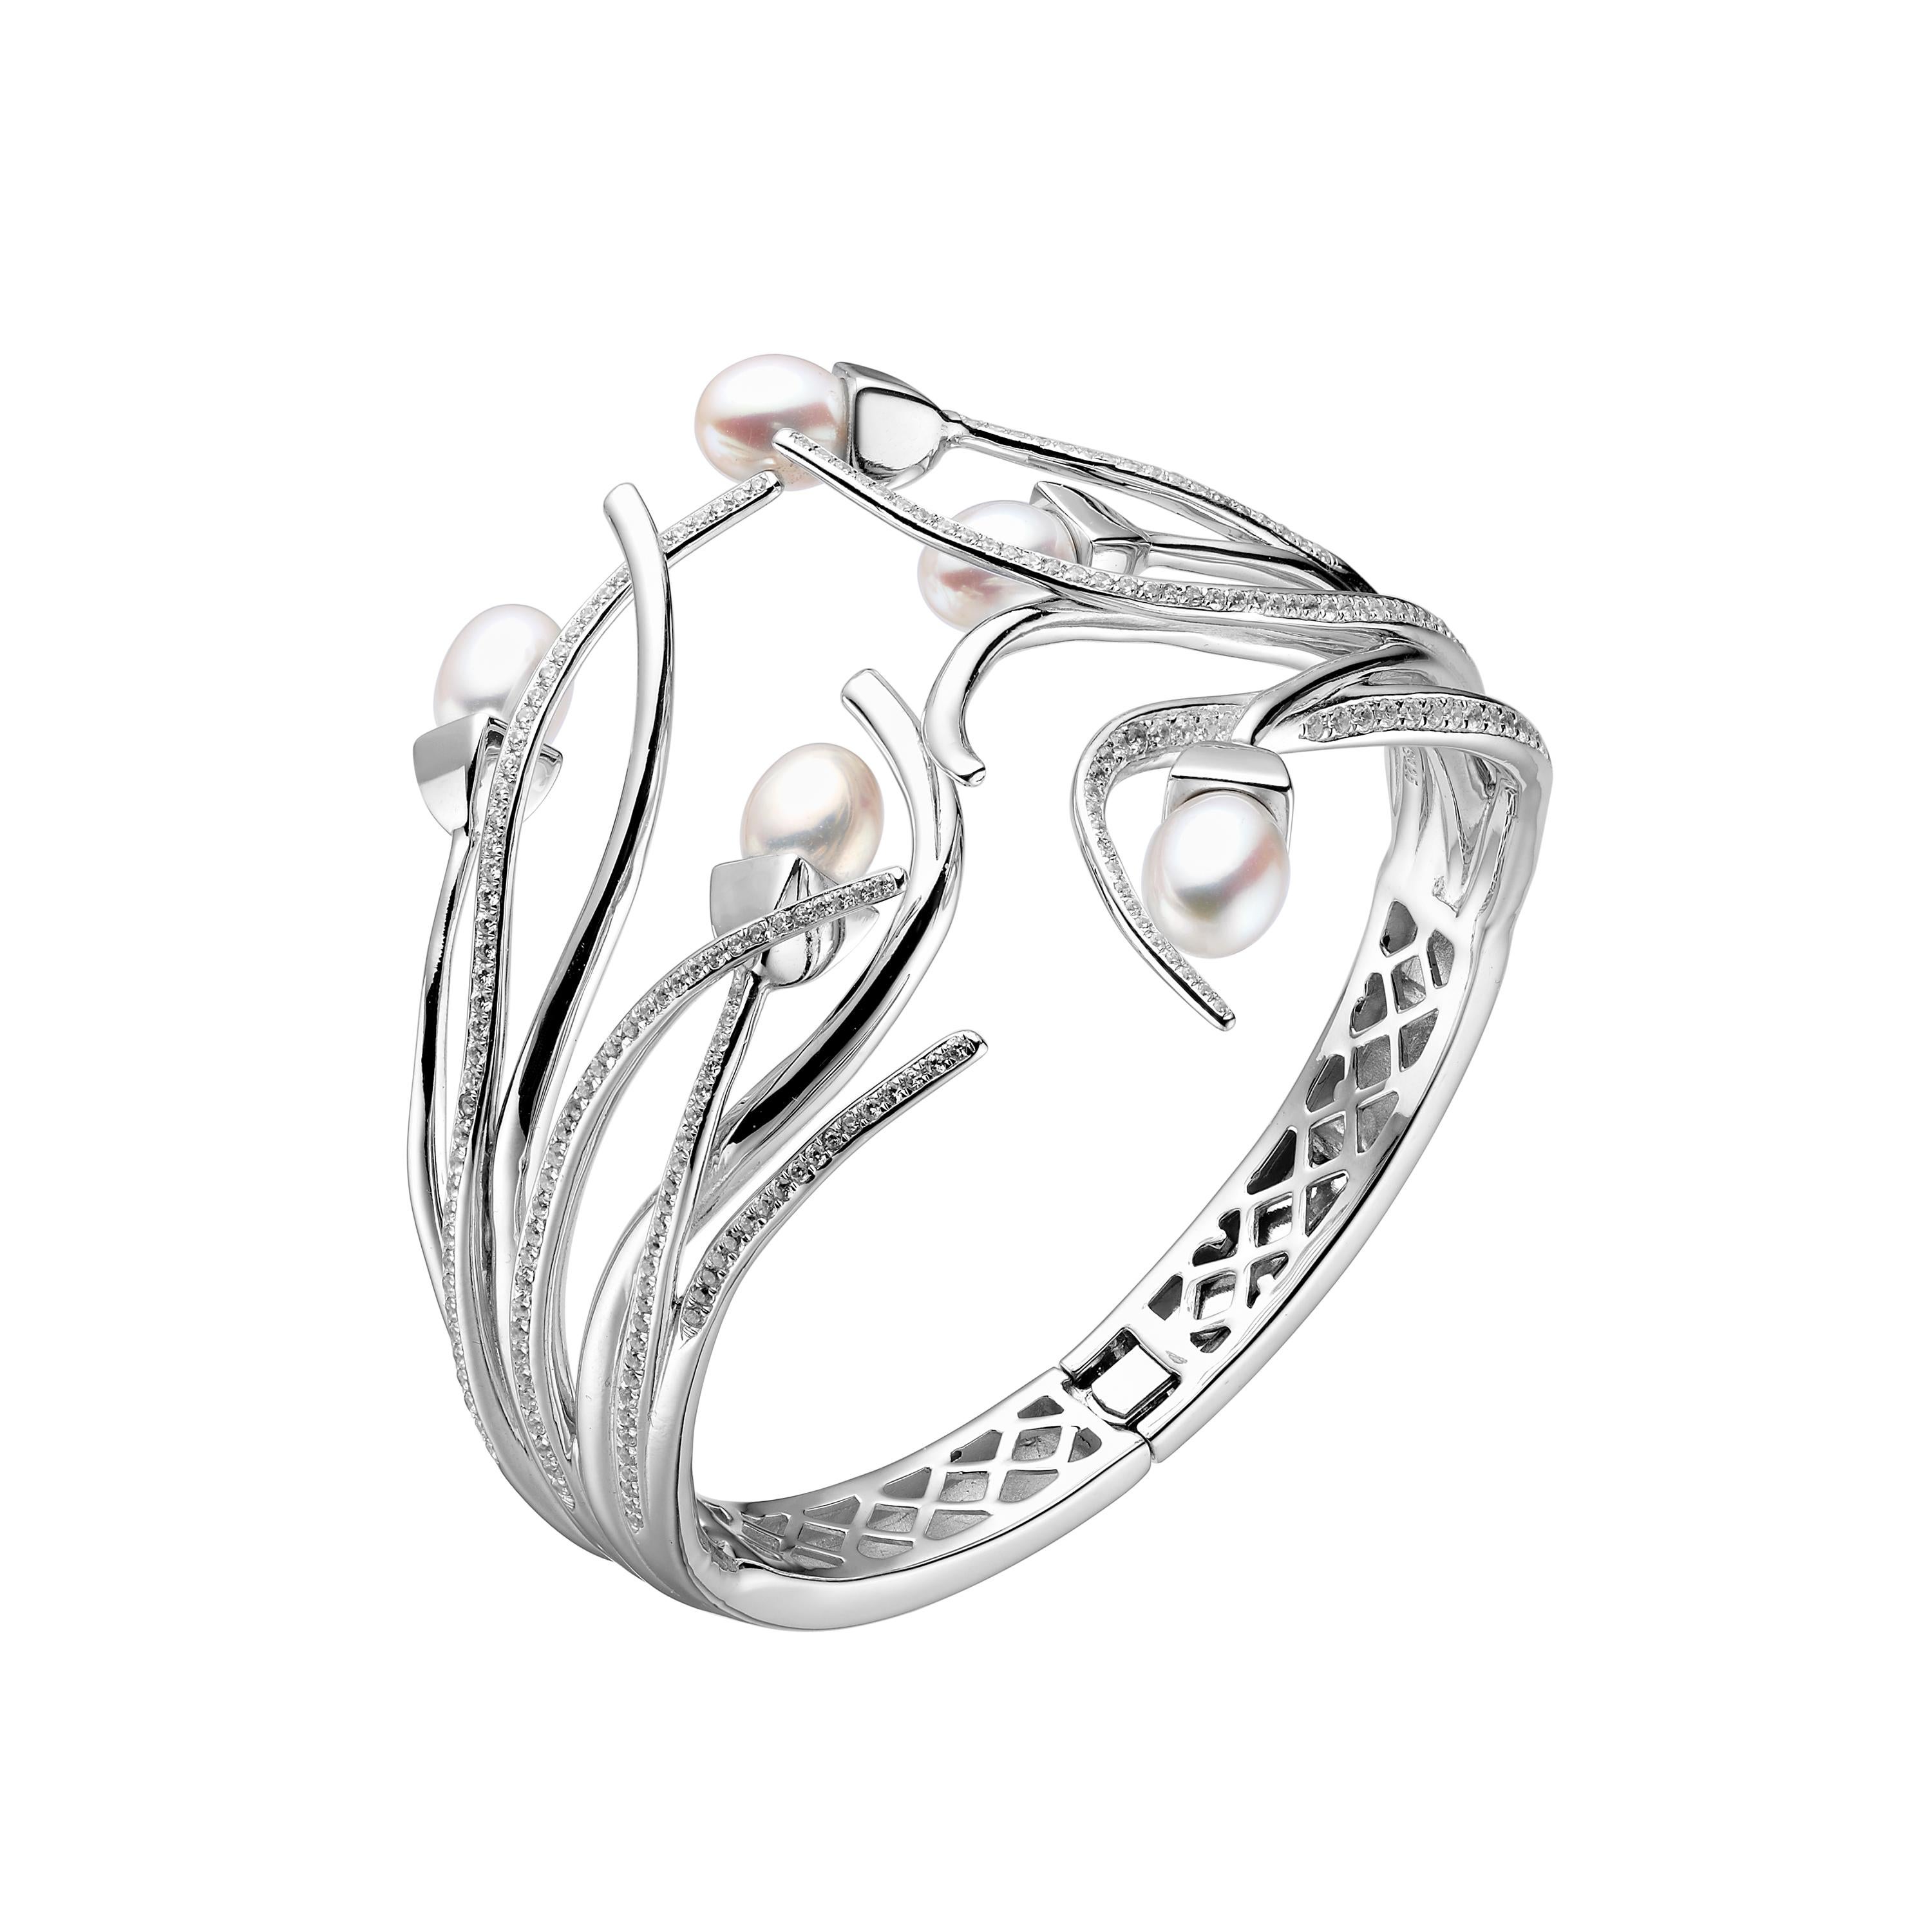 Description:
Snowdrop multi-pearl bangle with freshwater pearls and luxurious cubic zirconia set stems, set in white rhodium plate on sterling silver.

Inspiration:
The natural beauty of the English rose is captured in the Rose Collection double